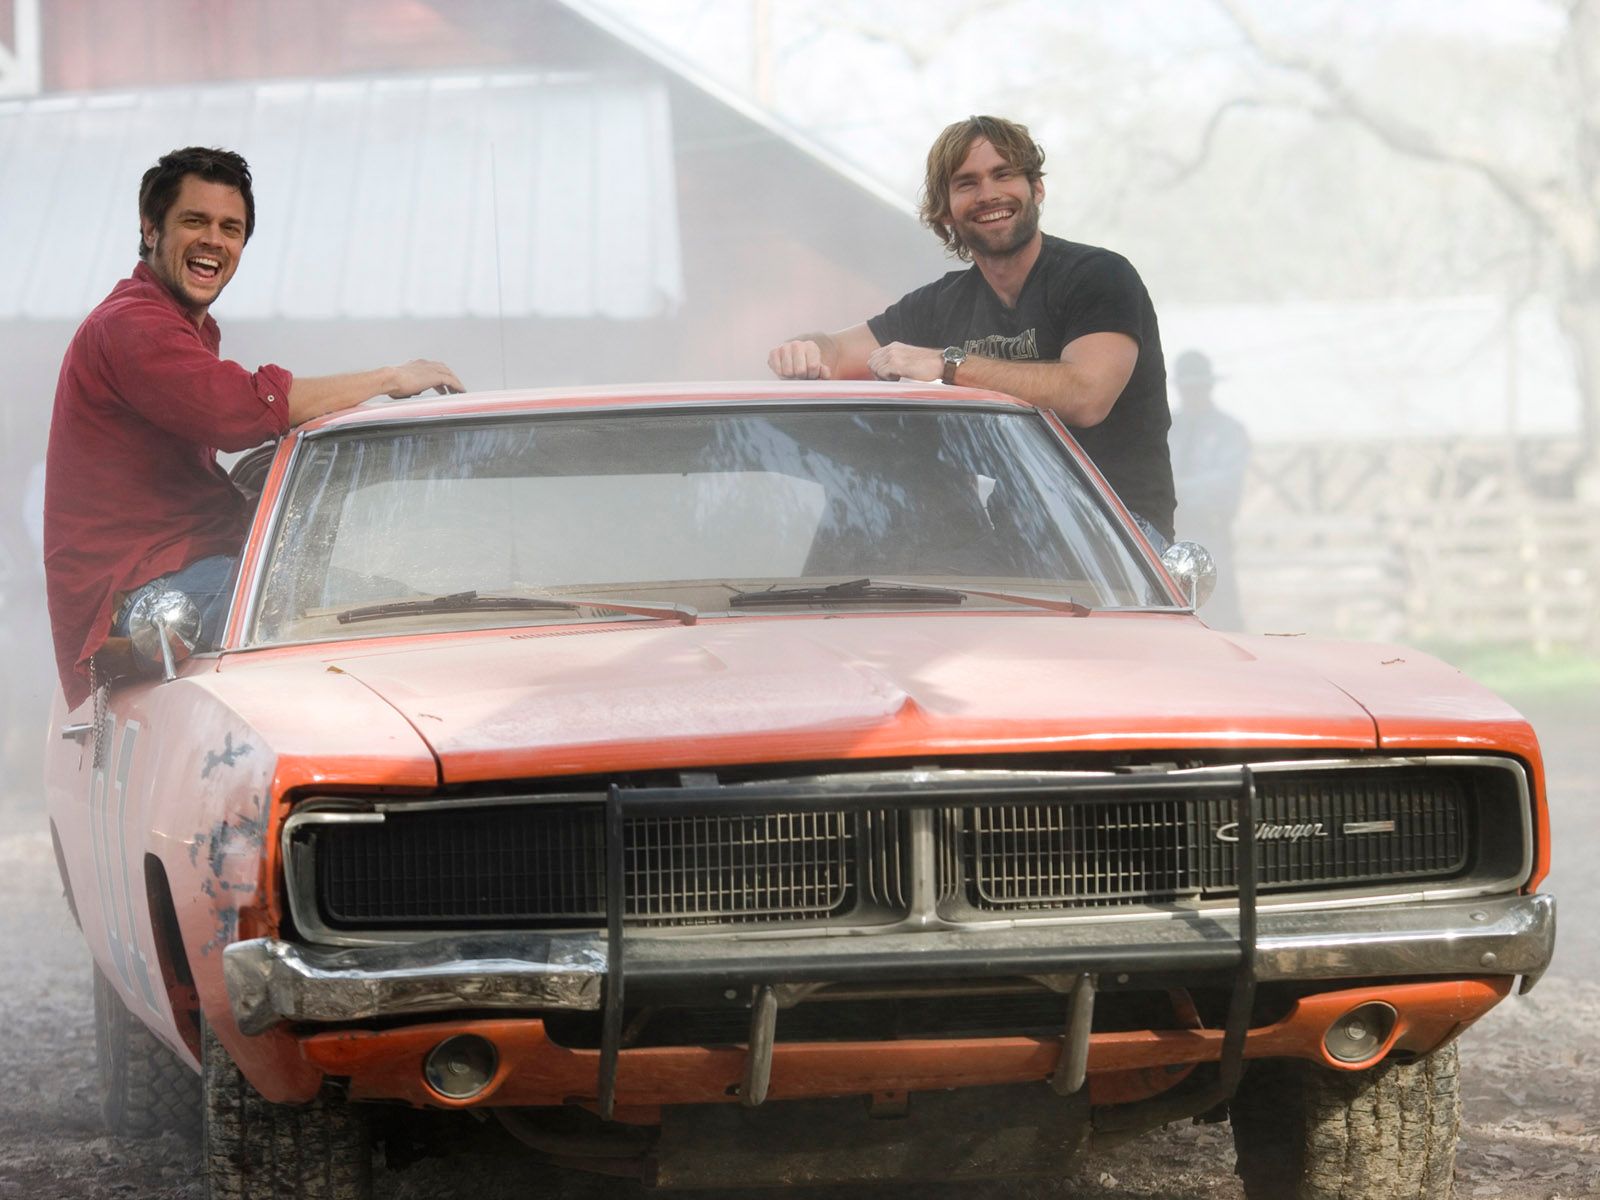 1969 Dodge Charger - General Lee (Dukes of Hazzard)